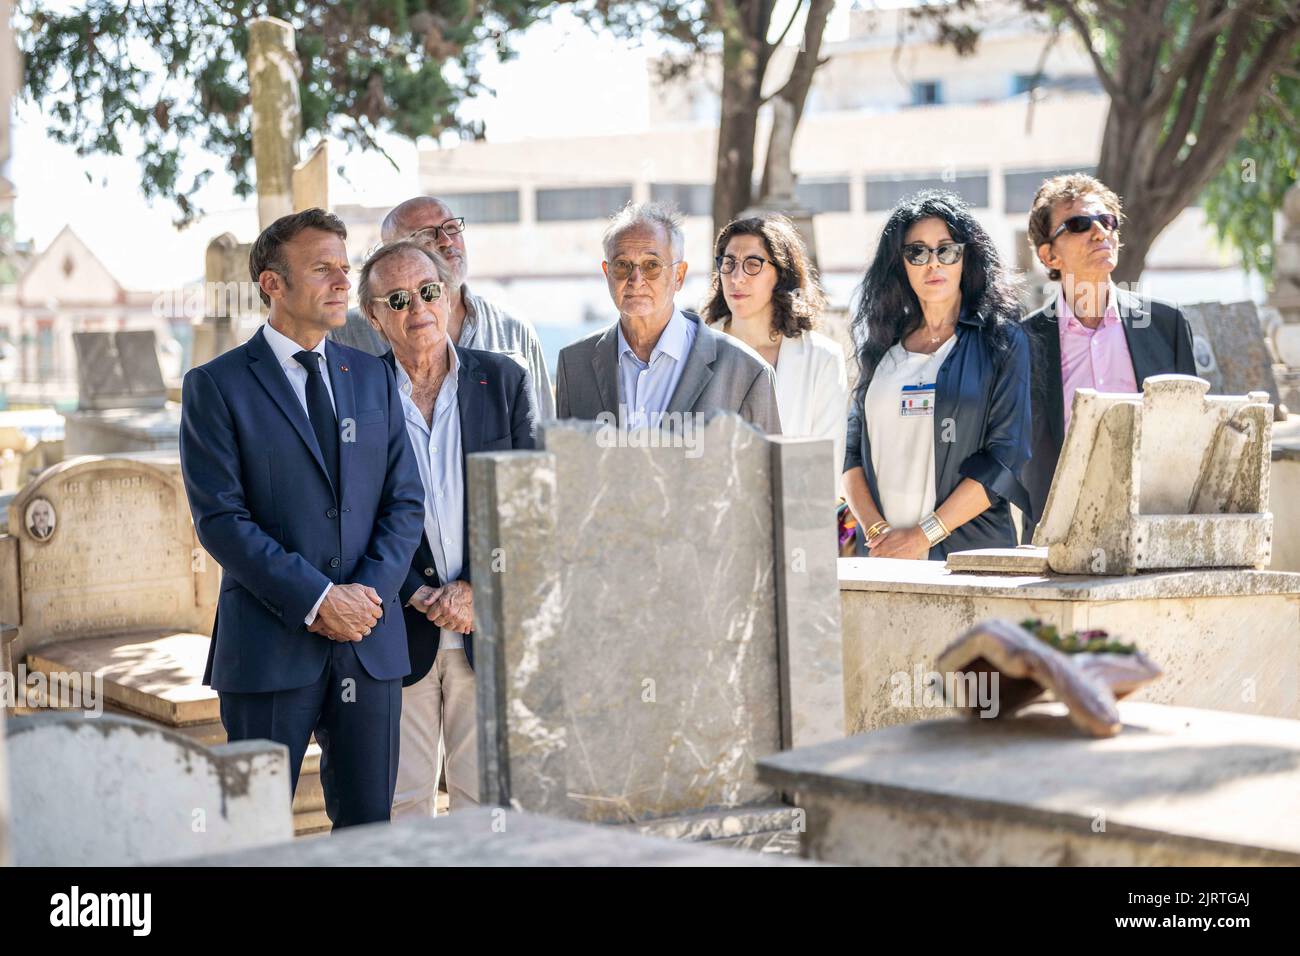 Algiers, Algeria, August 26, 2022, French President Emmanuel Macron , French film director Alexandre Arcady French economist Jacques Attali , and French Culture Minister Rima Abdul-Malak visit the grave of French actor Roger Hanin at the European Saint-Eugene Cemetery in Algiers accompanied by the caretaker of the cemetery on August 26, 2022. Photo by Eliot Blondet/ABACAPRESS.COM Stock Photo